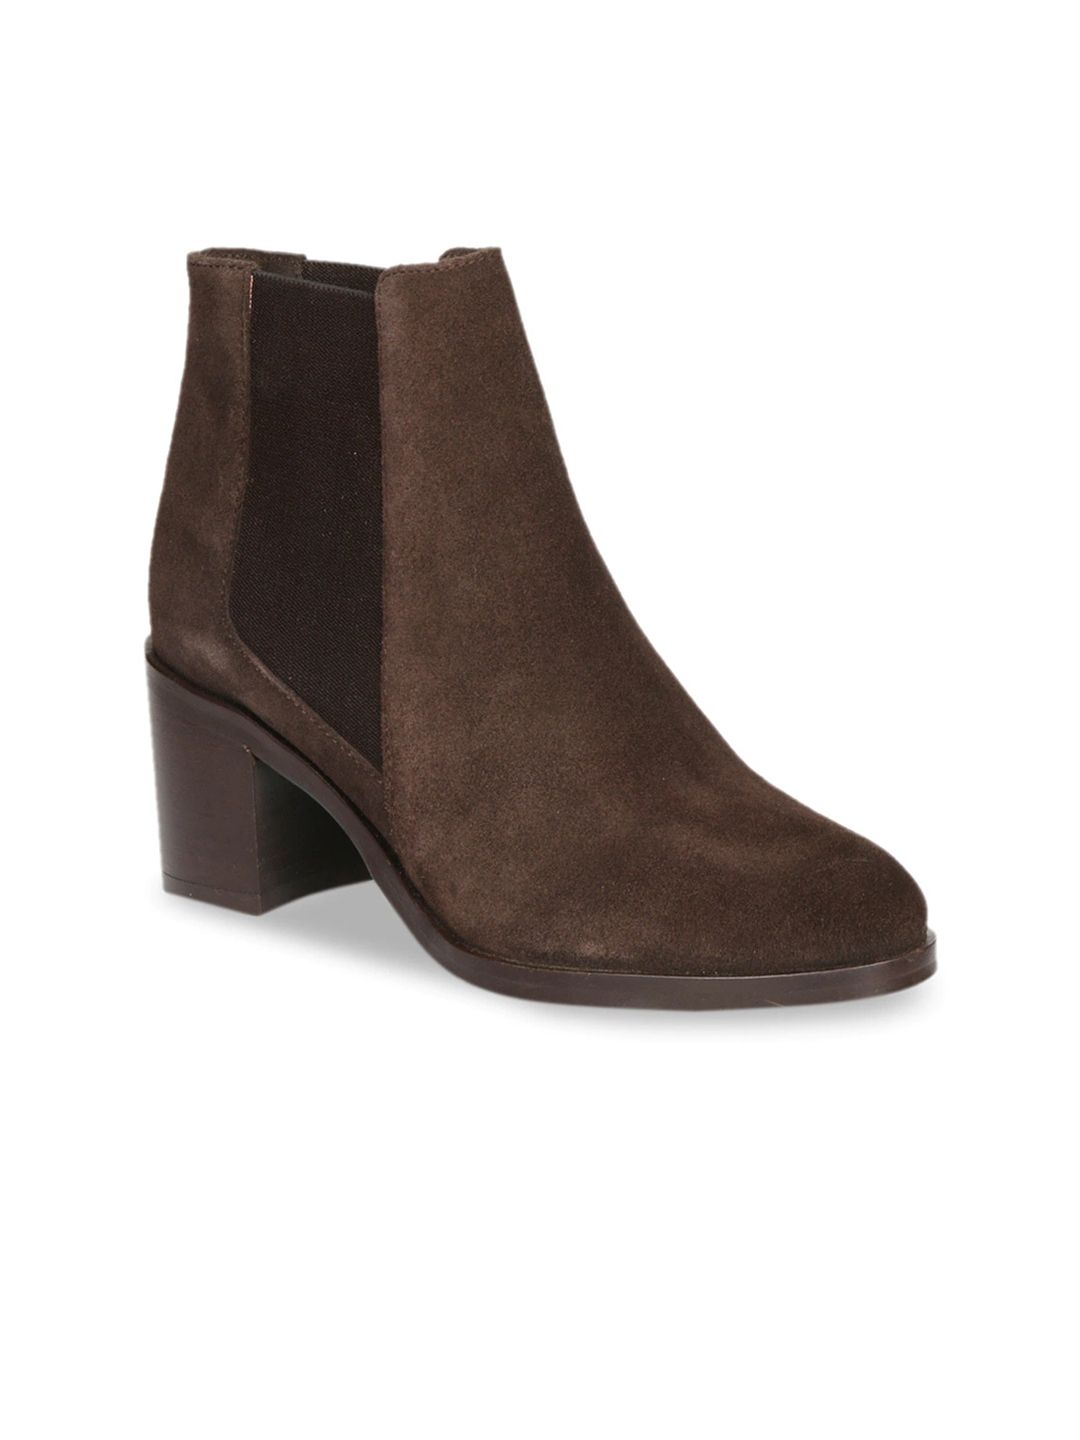 Saint G Brown Suede Block Heeled Boots Price in India